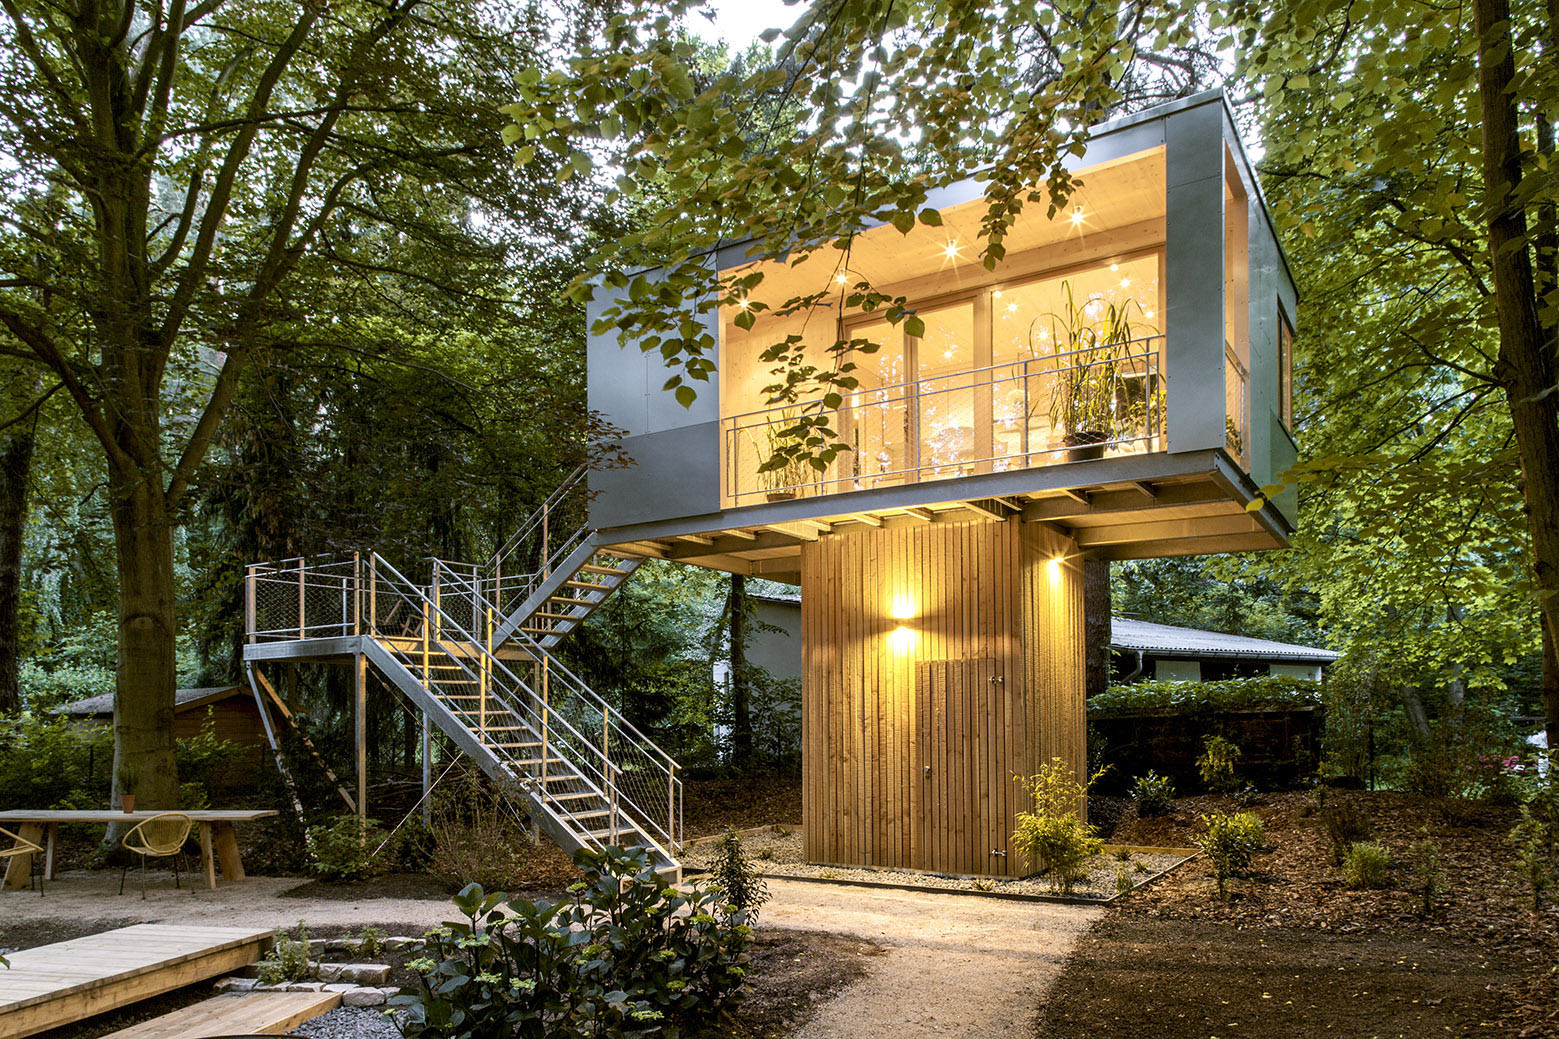 Tiny Treehouse Urban Oasis In Berlin | iDesignArch ...